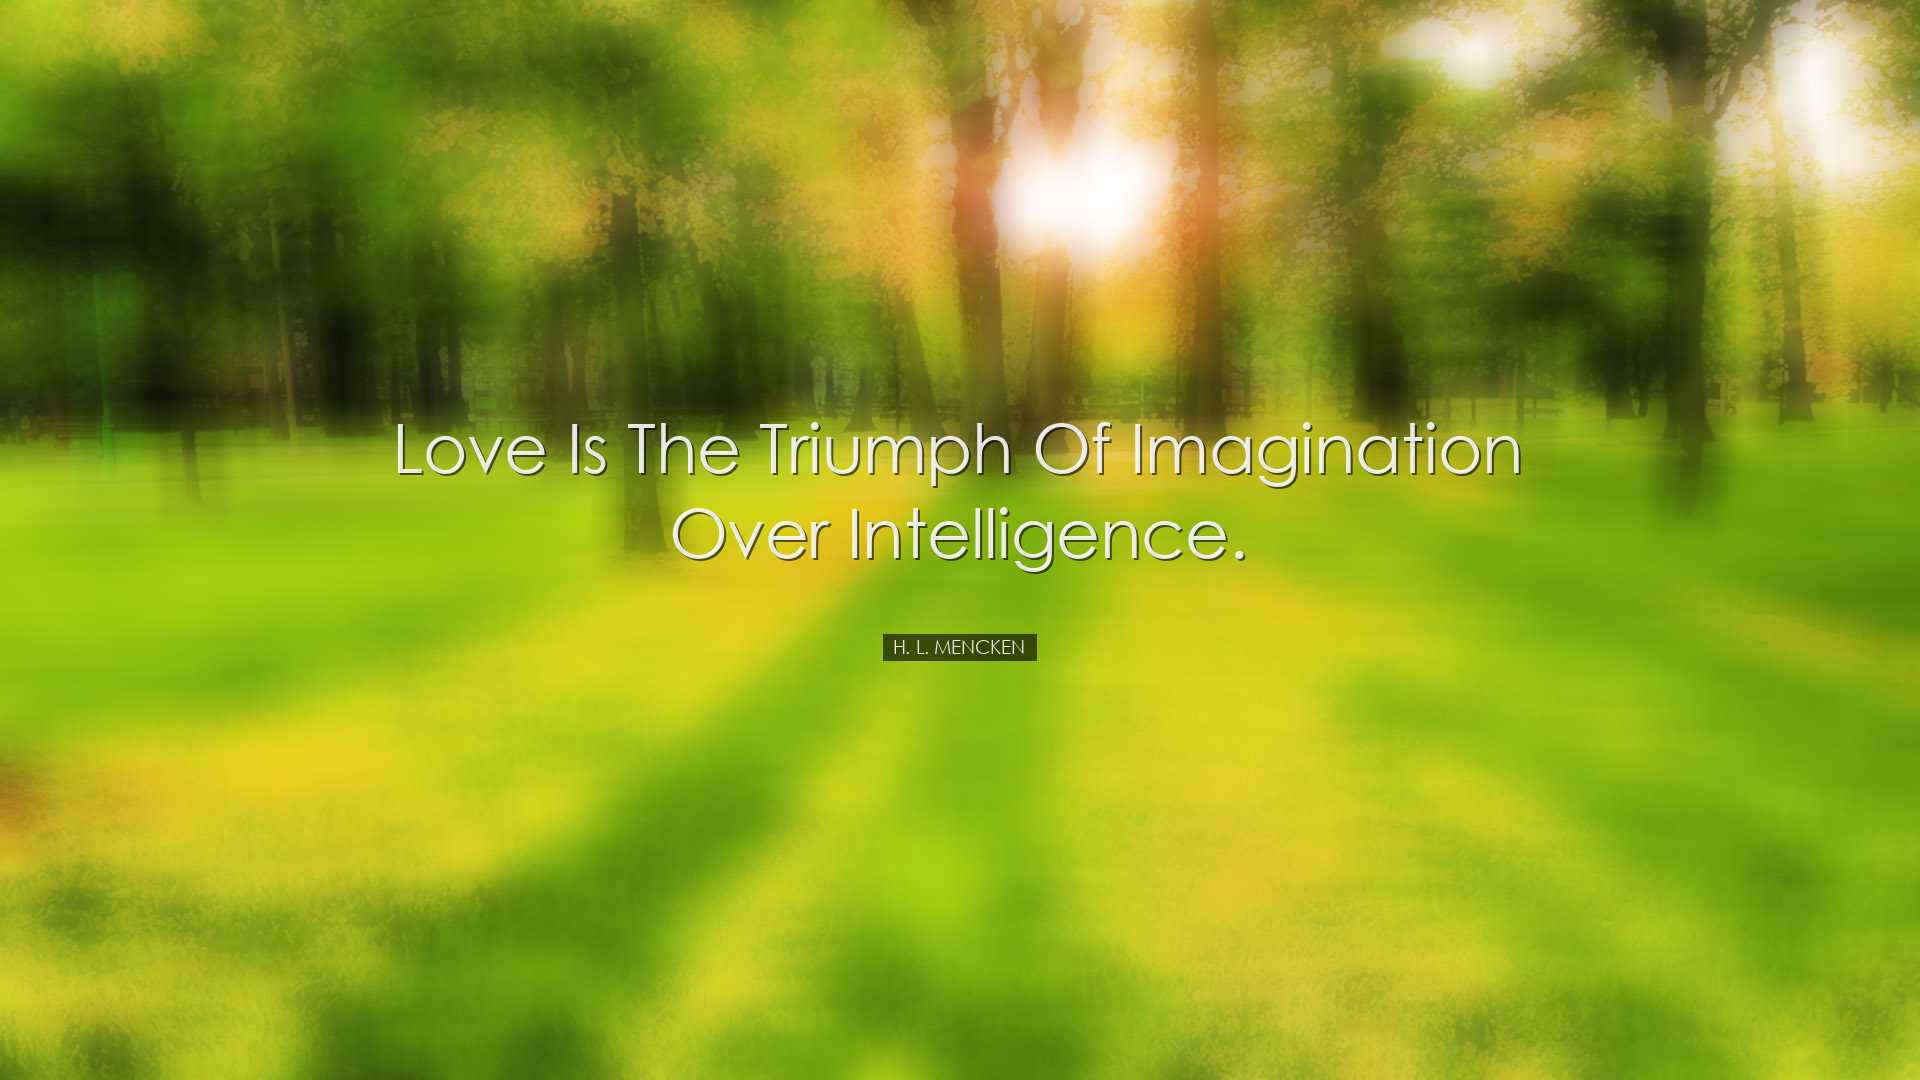 Love is the triumph of imagination over intelligence. - H. L. Menc